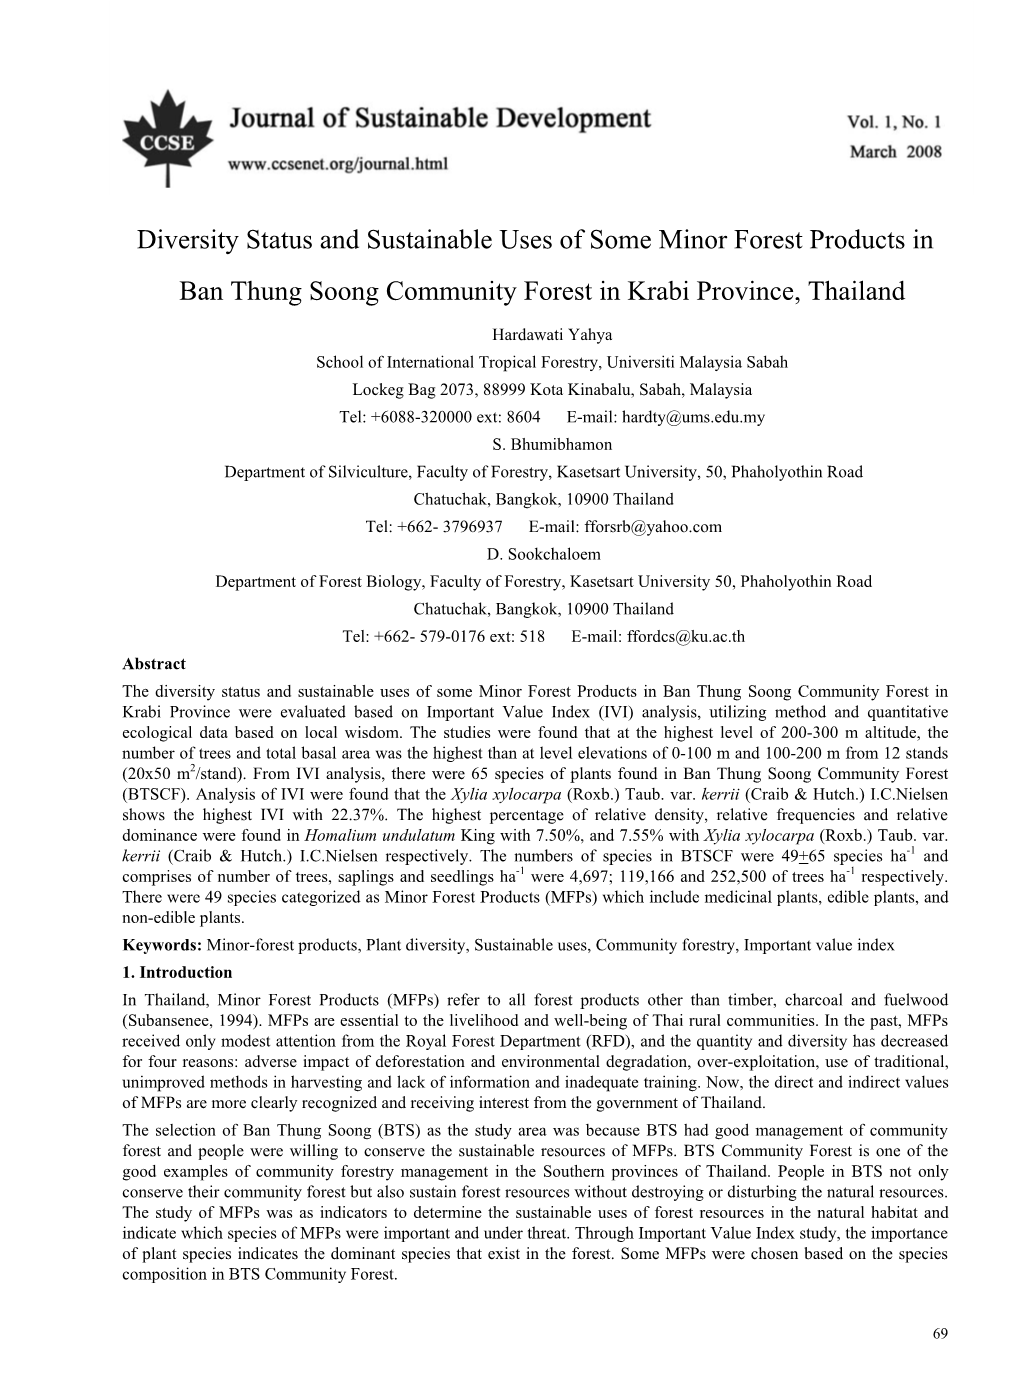 Diversity Status and Sustainable Uses of Some Minor Forest Products in Ban Thung Soong Community Forest in Krabi Province, Thailand